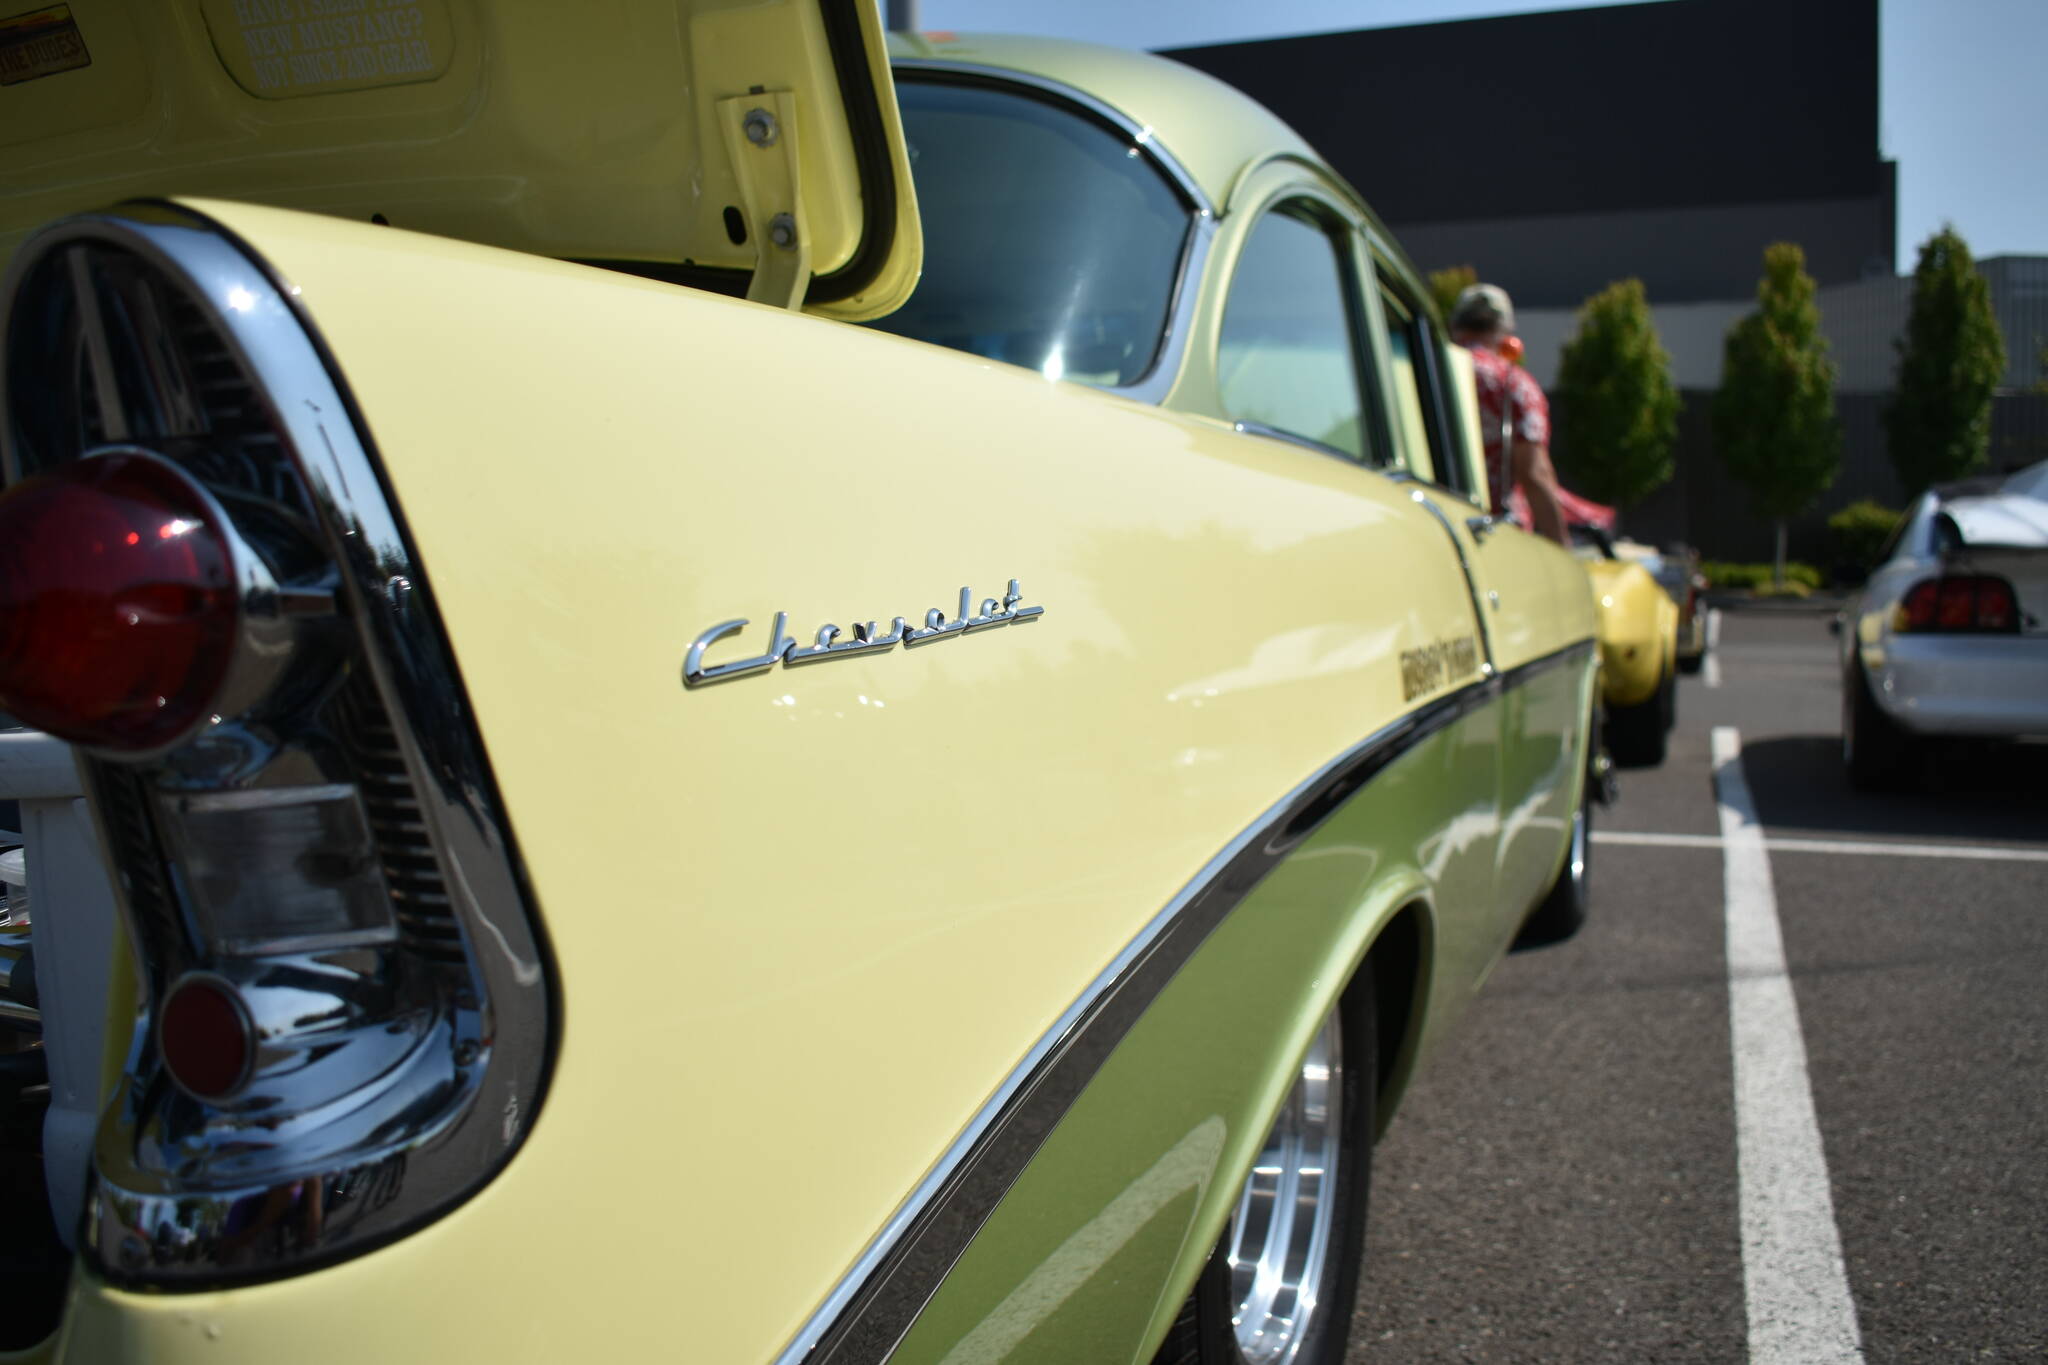 Cars were on display at the Federal Way Performing Arts Center before making their final destination for Fan Fest at the Outlet Collection on July 20. (Photos by Ben Ray / Sound Publishing)